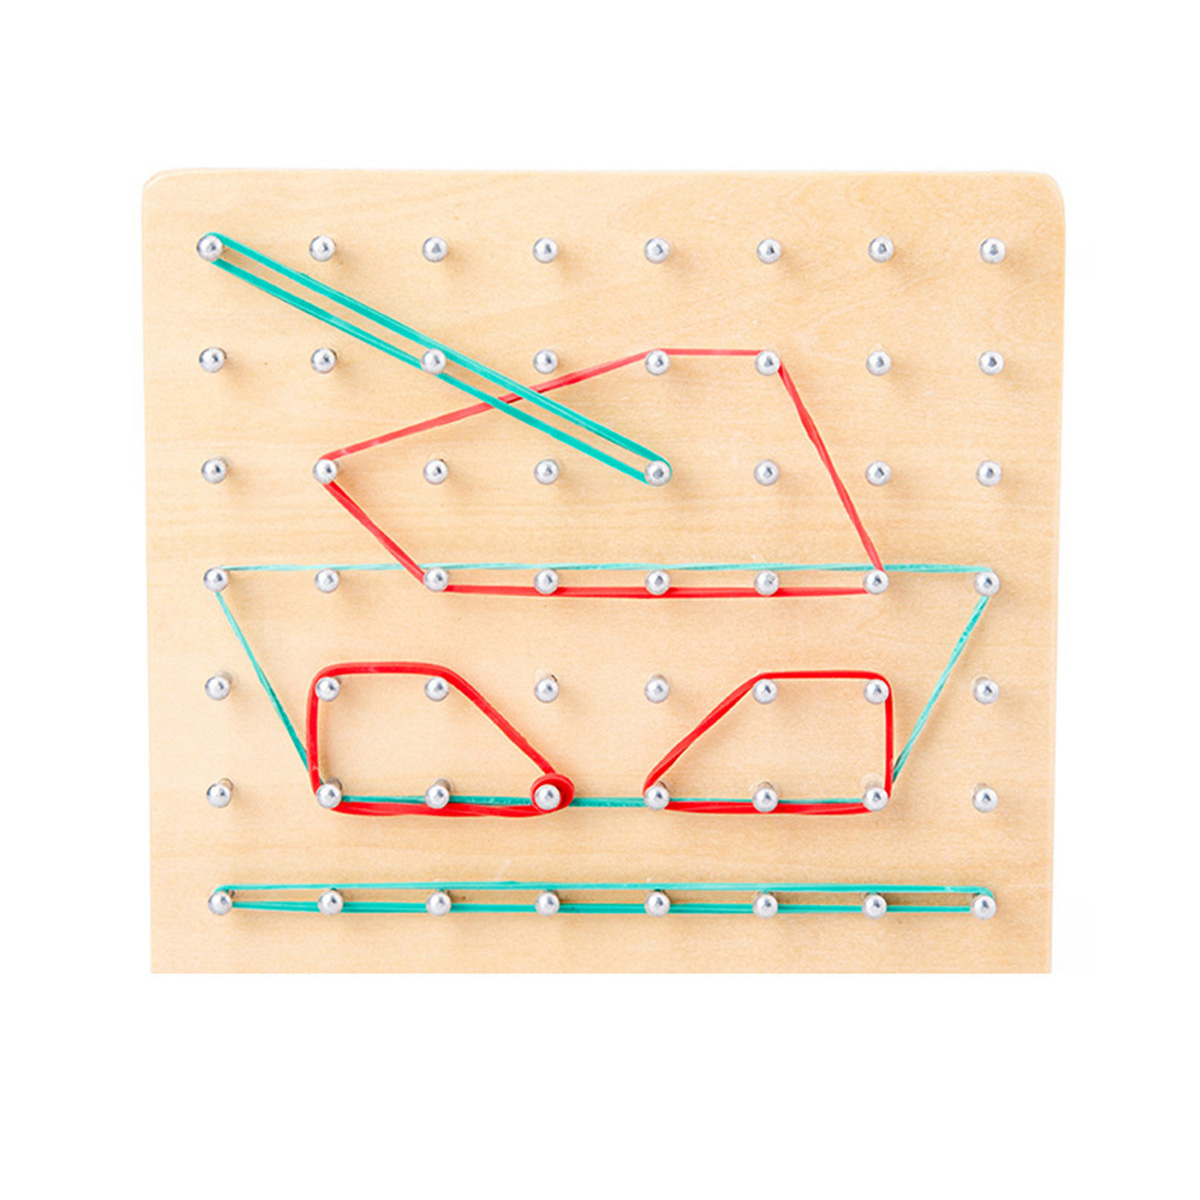 Montessori-Traditional-Teaching-Geometry-Puzzle-Pattern-Educational-School-Home-Game-Toy-for-Kids-Gi-1726969-9